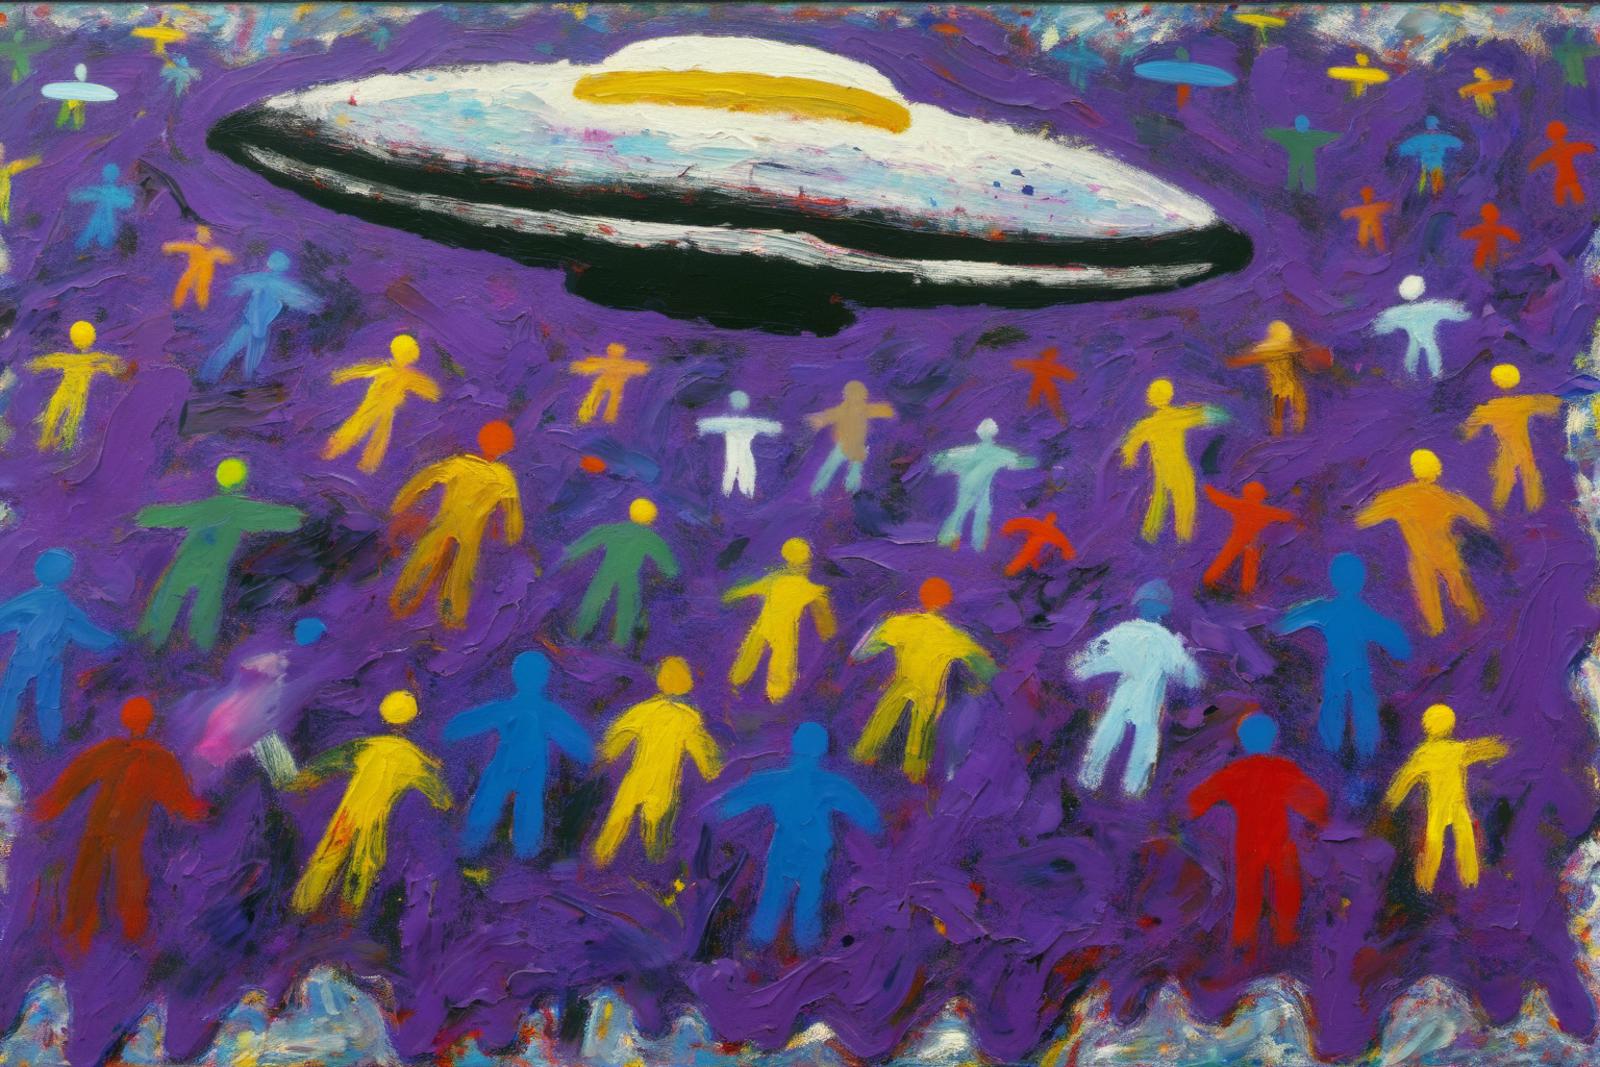 A colorful painting of a crowd of people under a UFO with an egg in it.